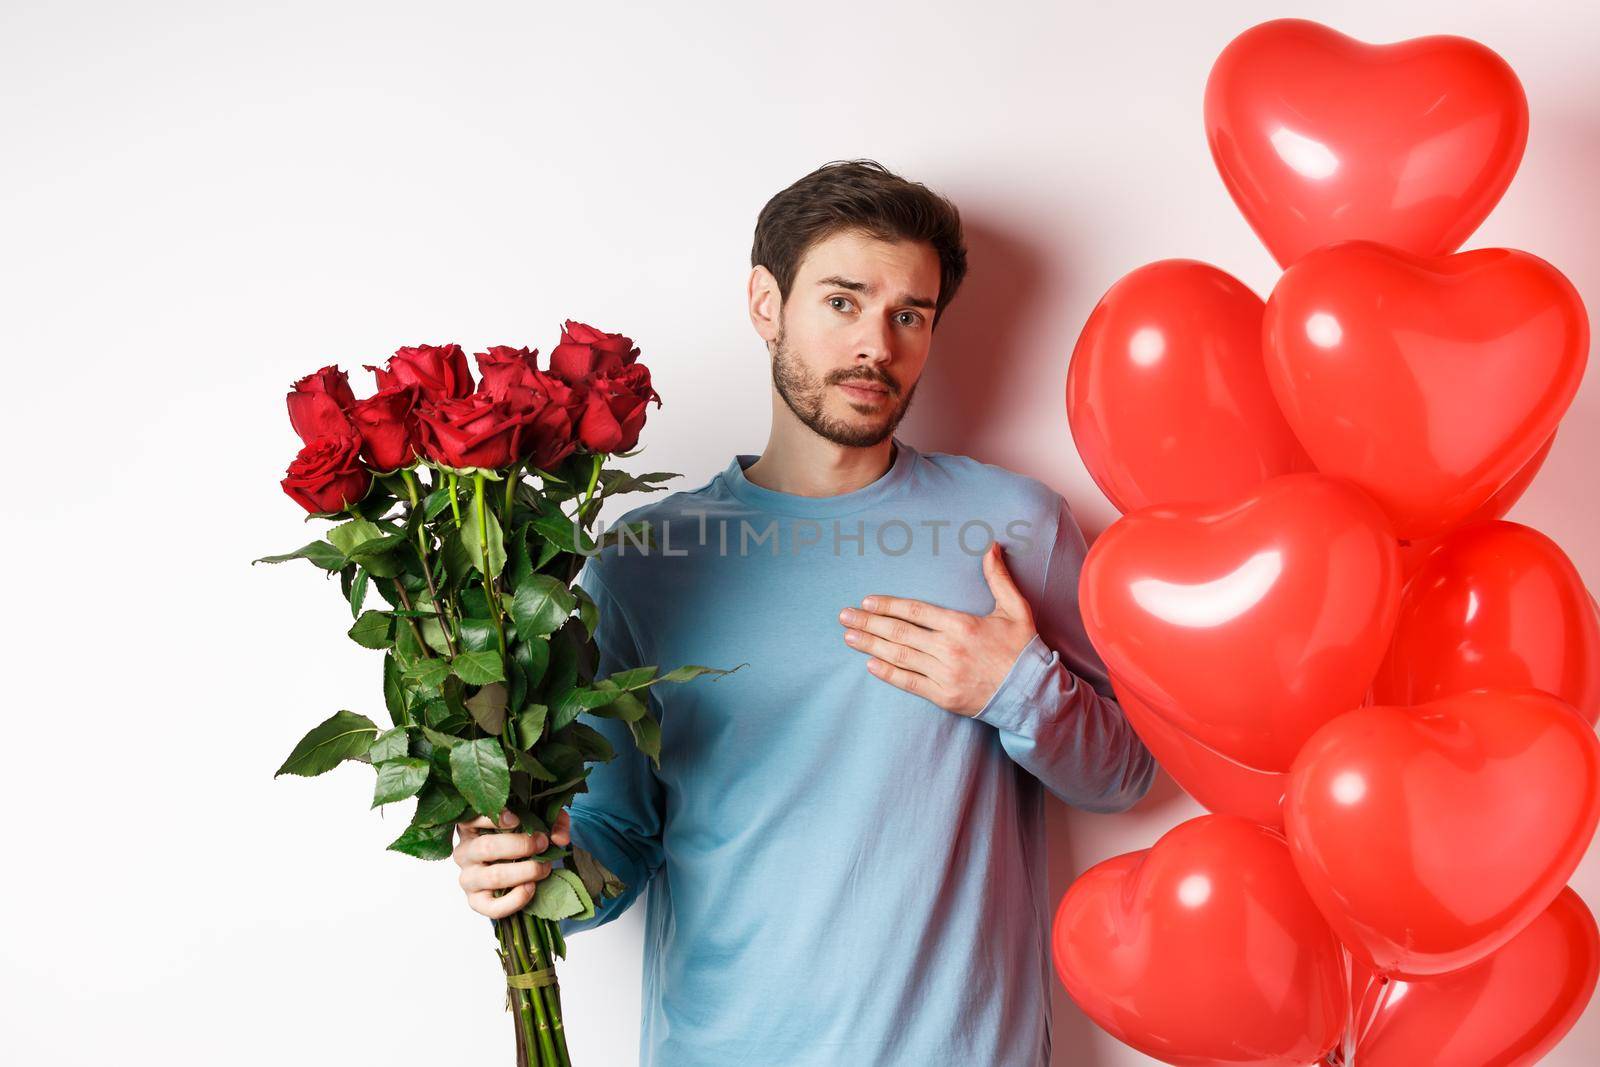 Romantic guy express his love on Valentines day with gifts, bring bouquet of red roses and balloons, holding hand on heart, standing over white background.